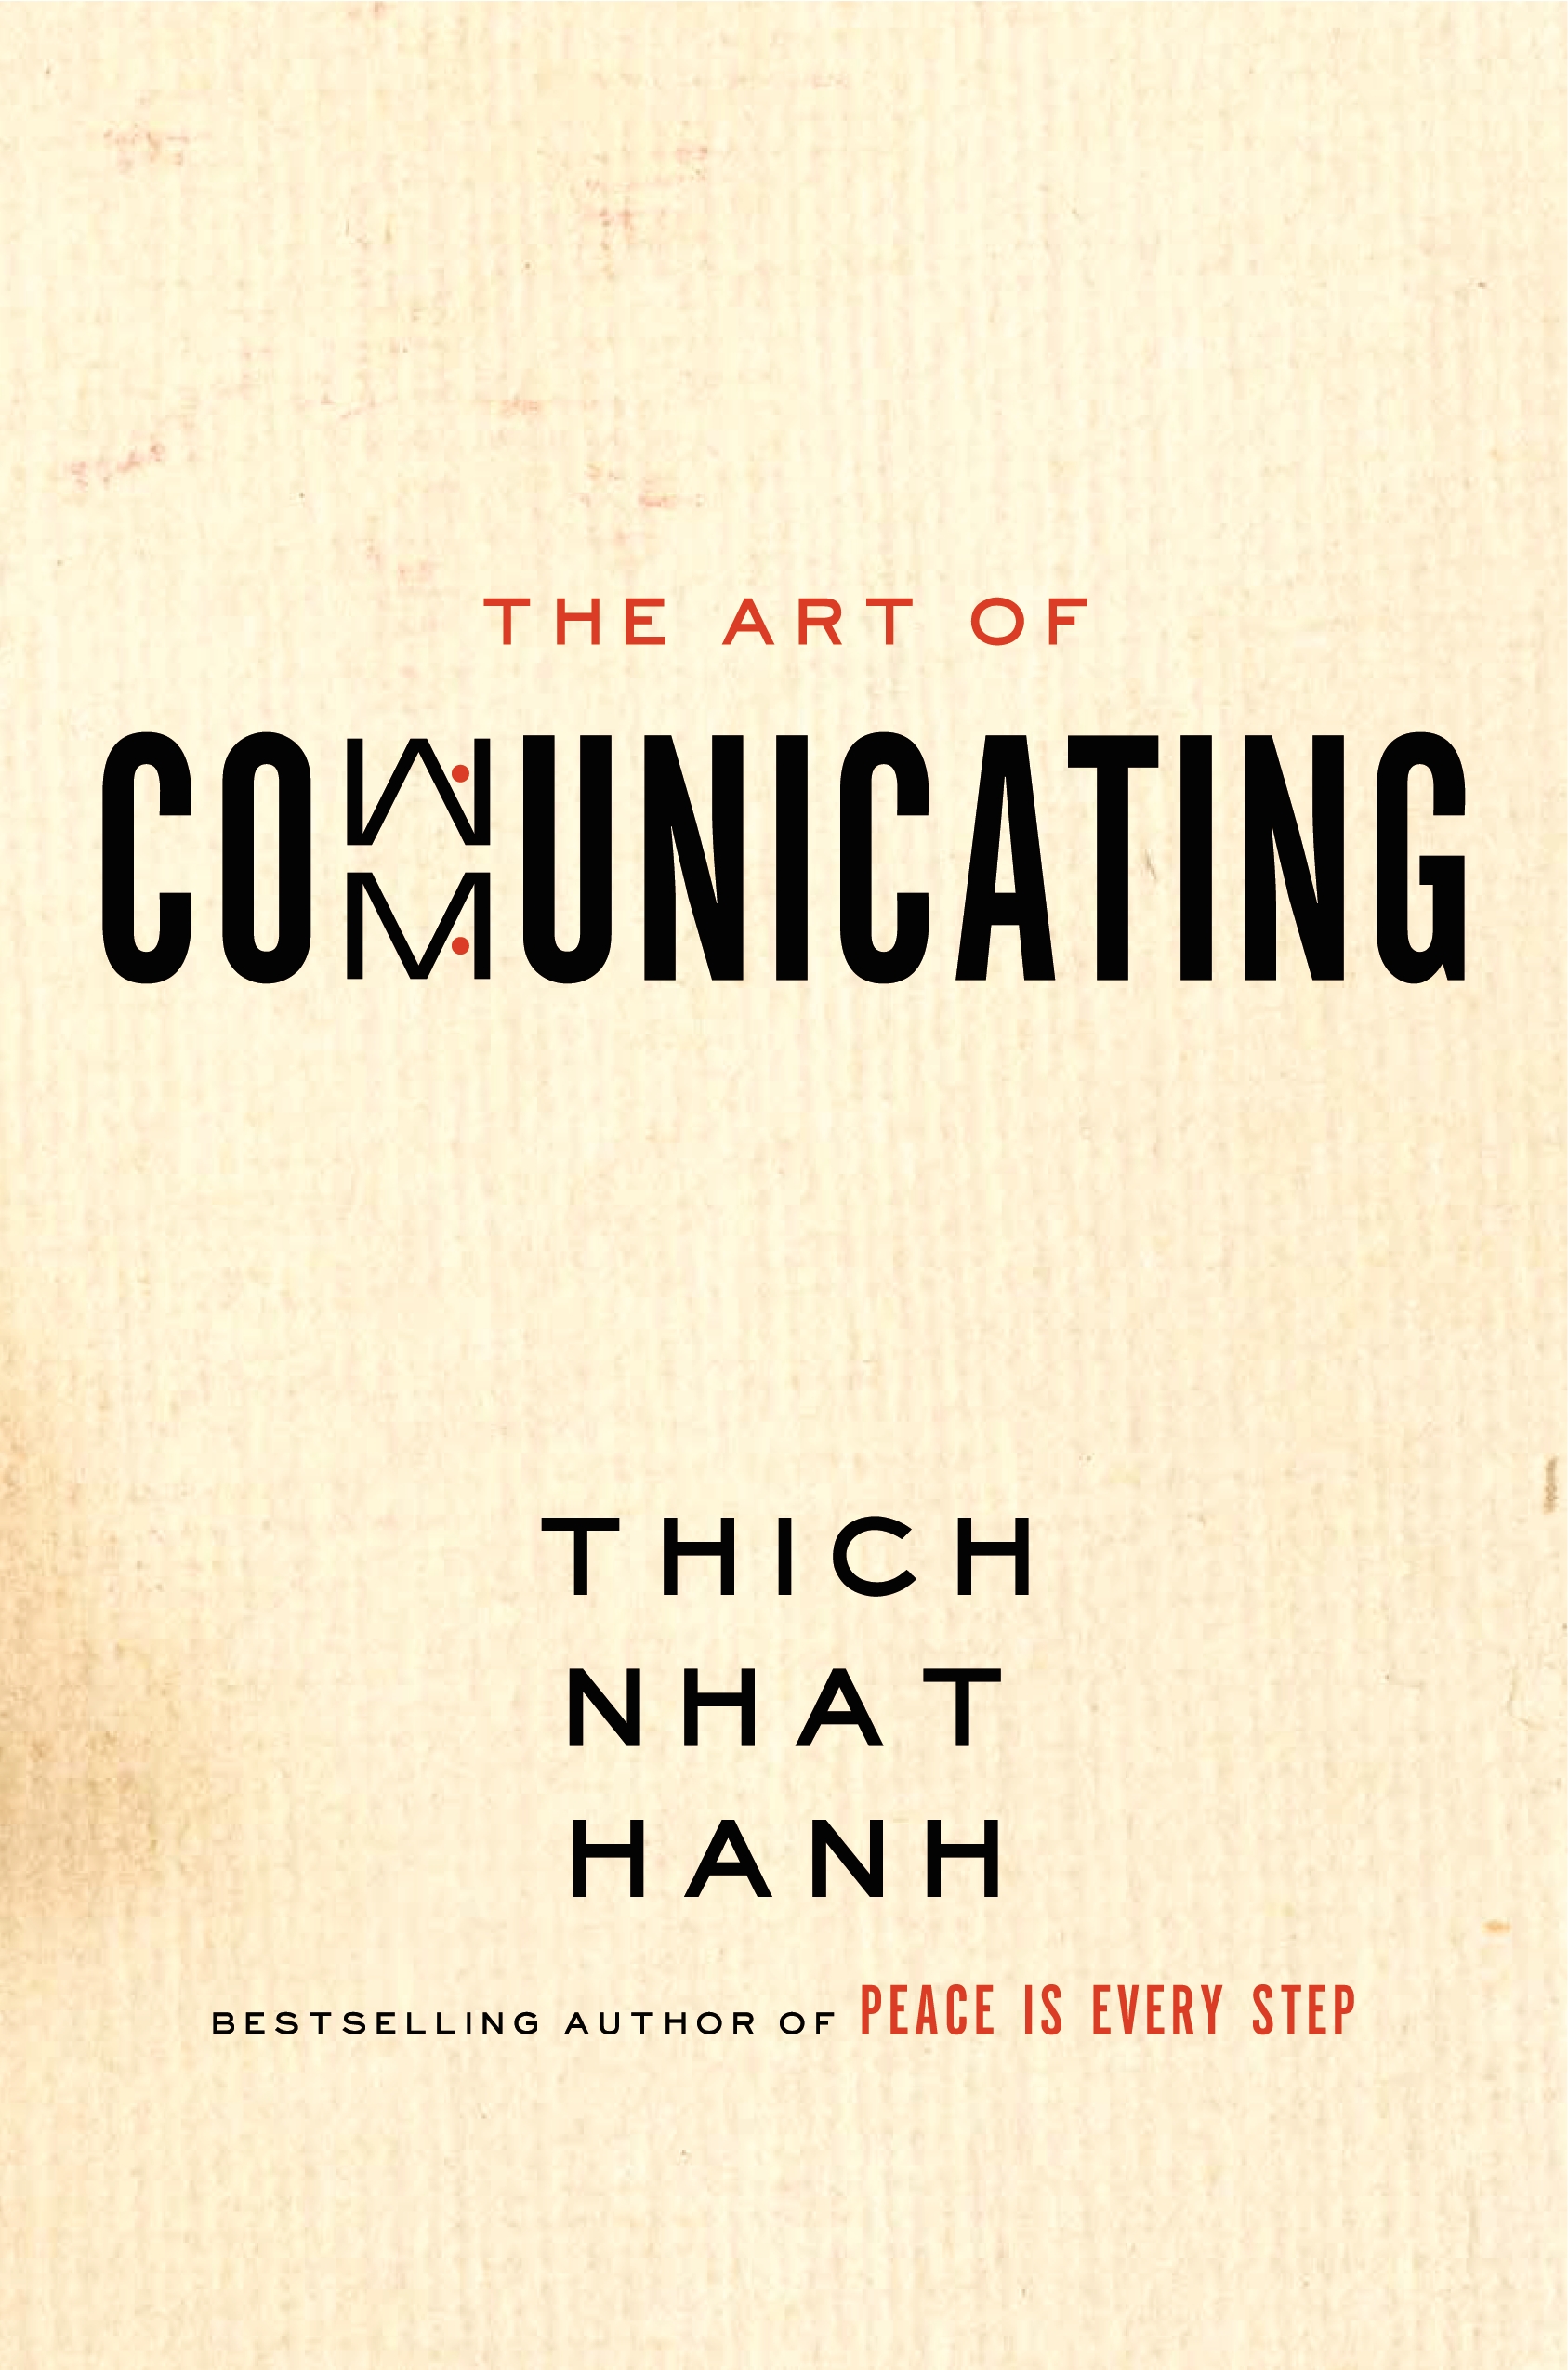 New Book "The Art of Communicating" by Nobel Peace Prize Nominee Thich